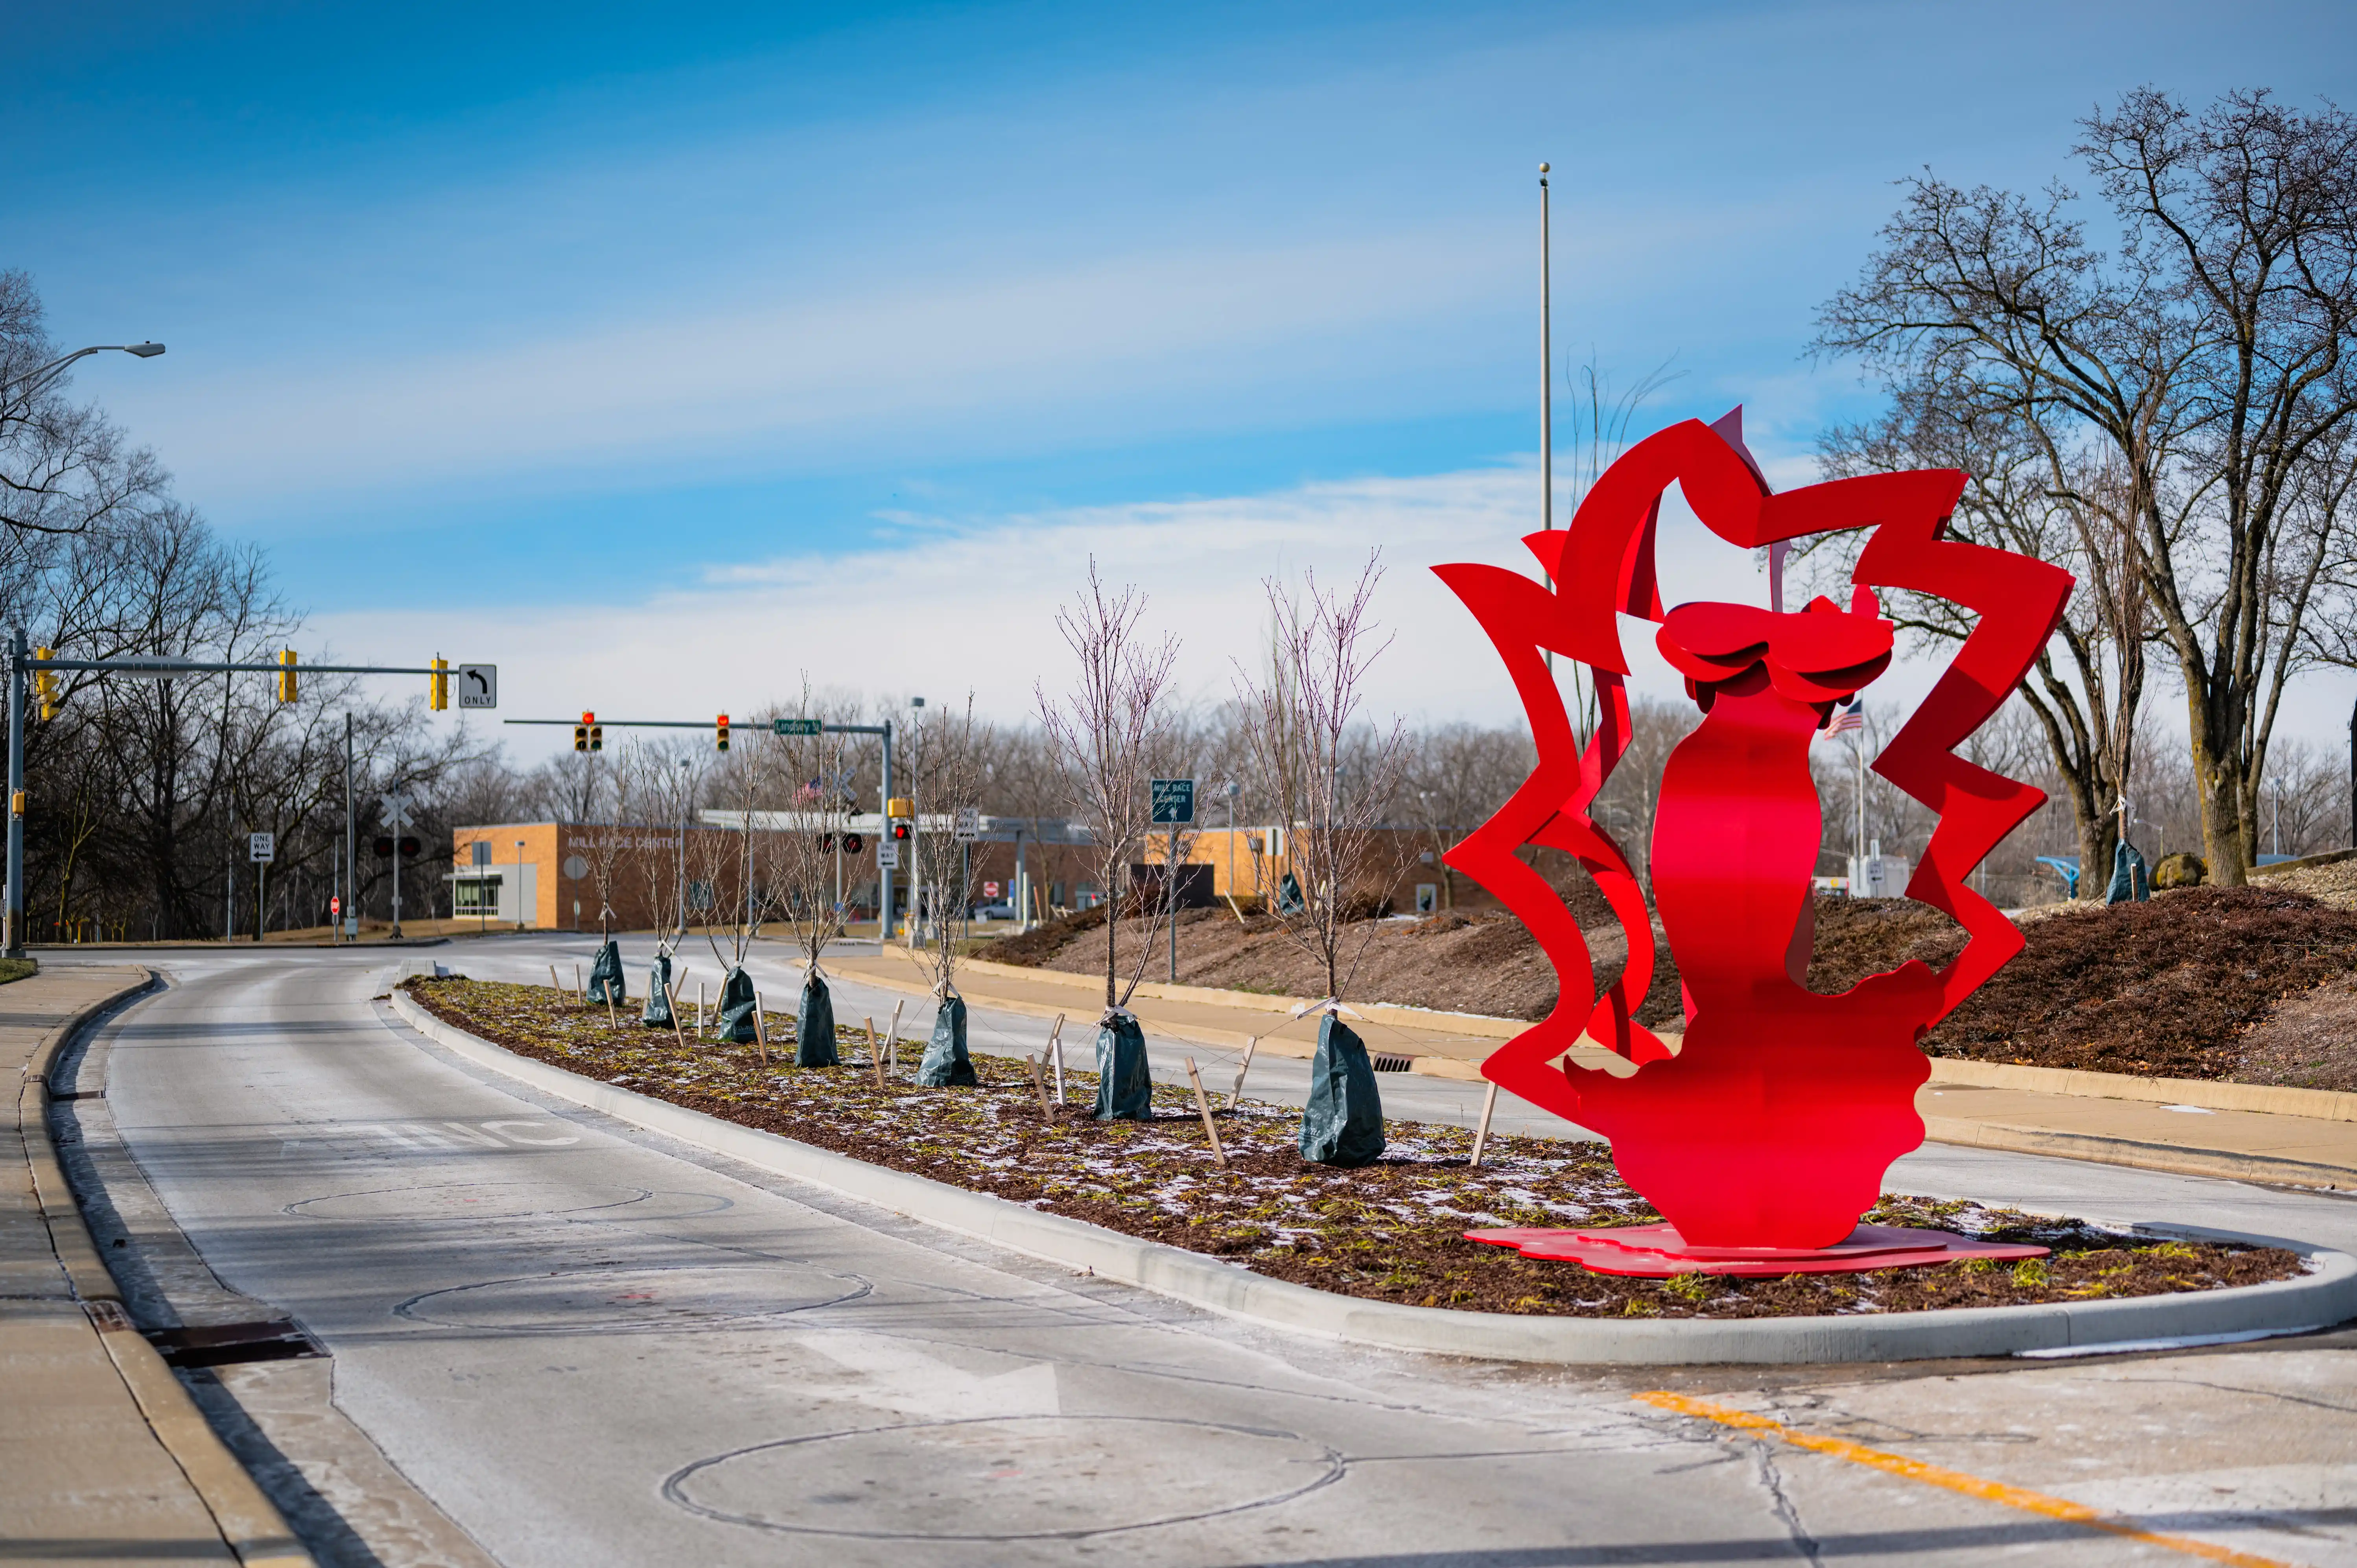 Red abstract sculpture situated in a roundabout with a clear blue sky in the background and bare trees in the distance.